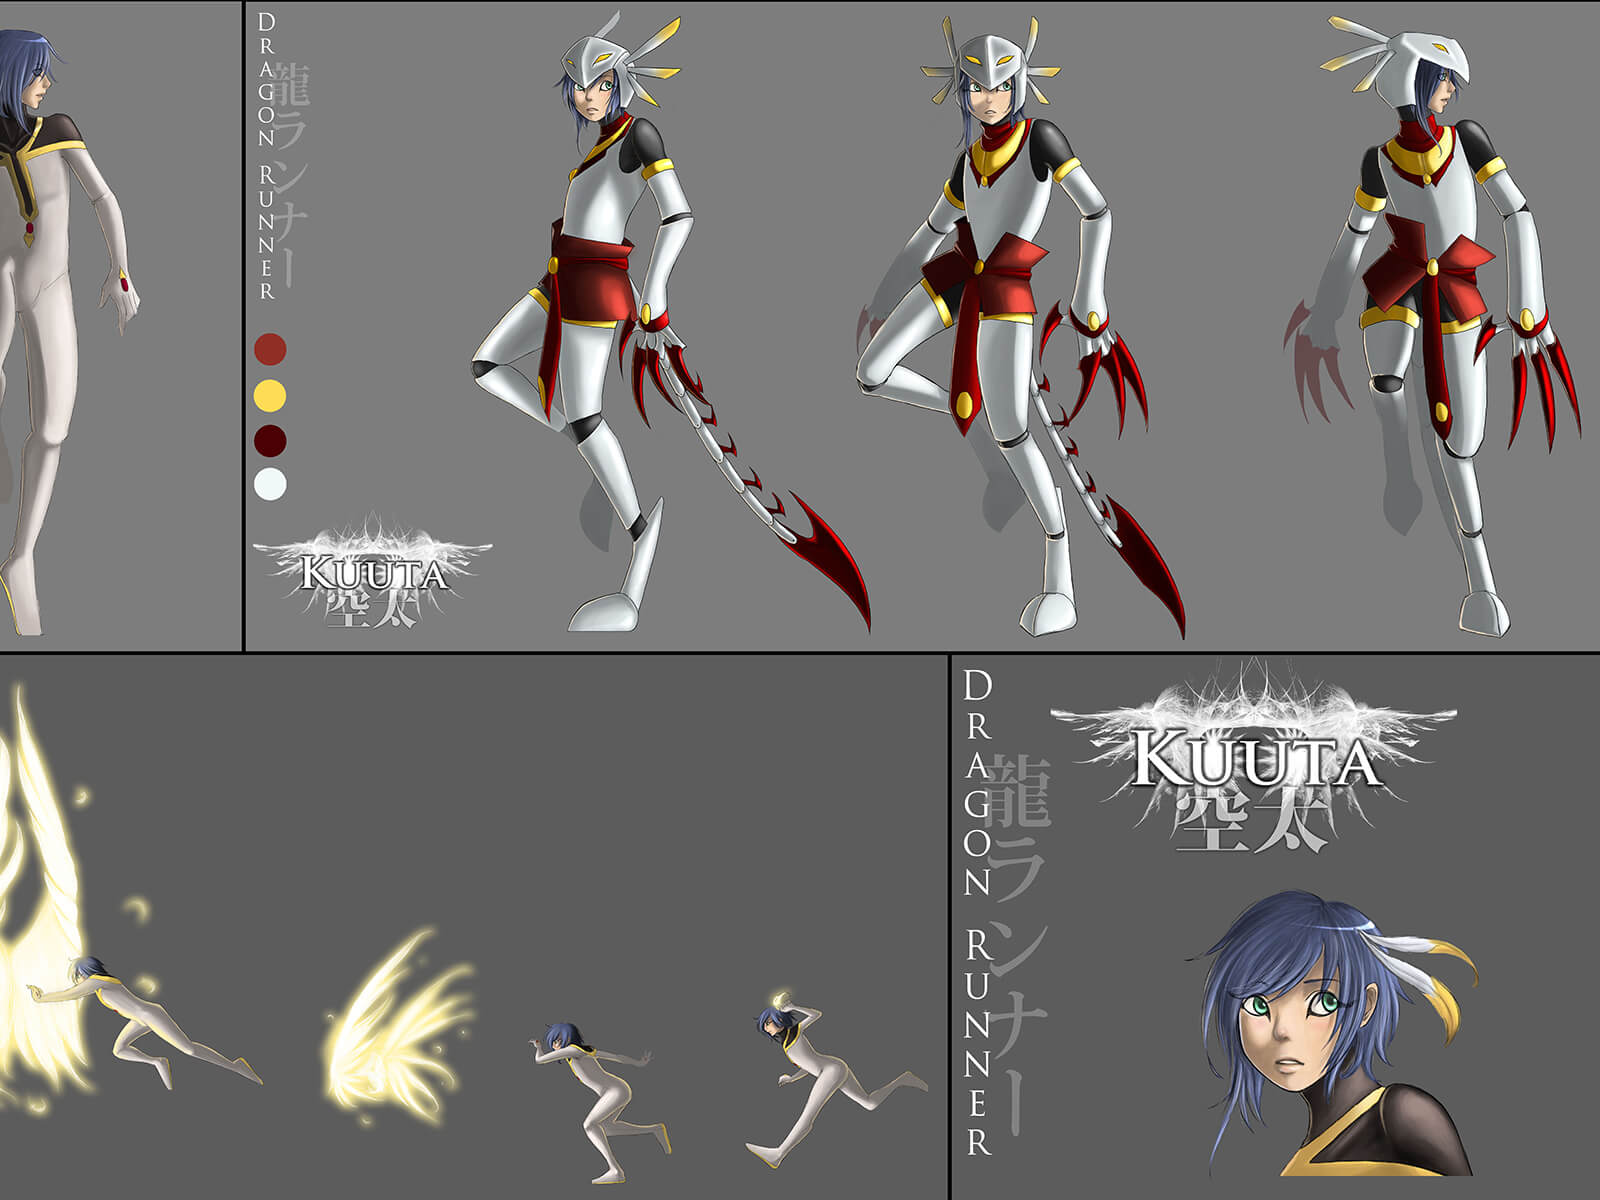 Character and movement sketches of a woman in a white-black-and-red skinsuit as she transforms into a cat-like hero.